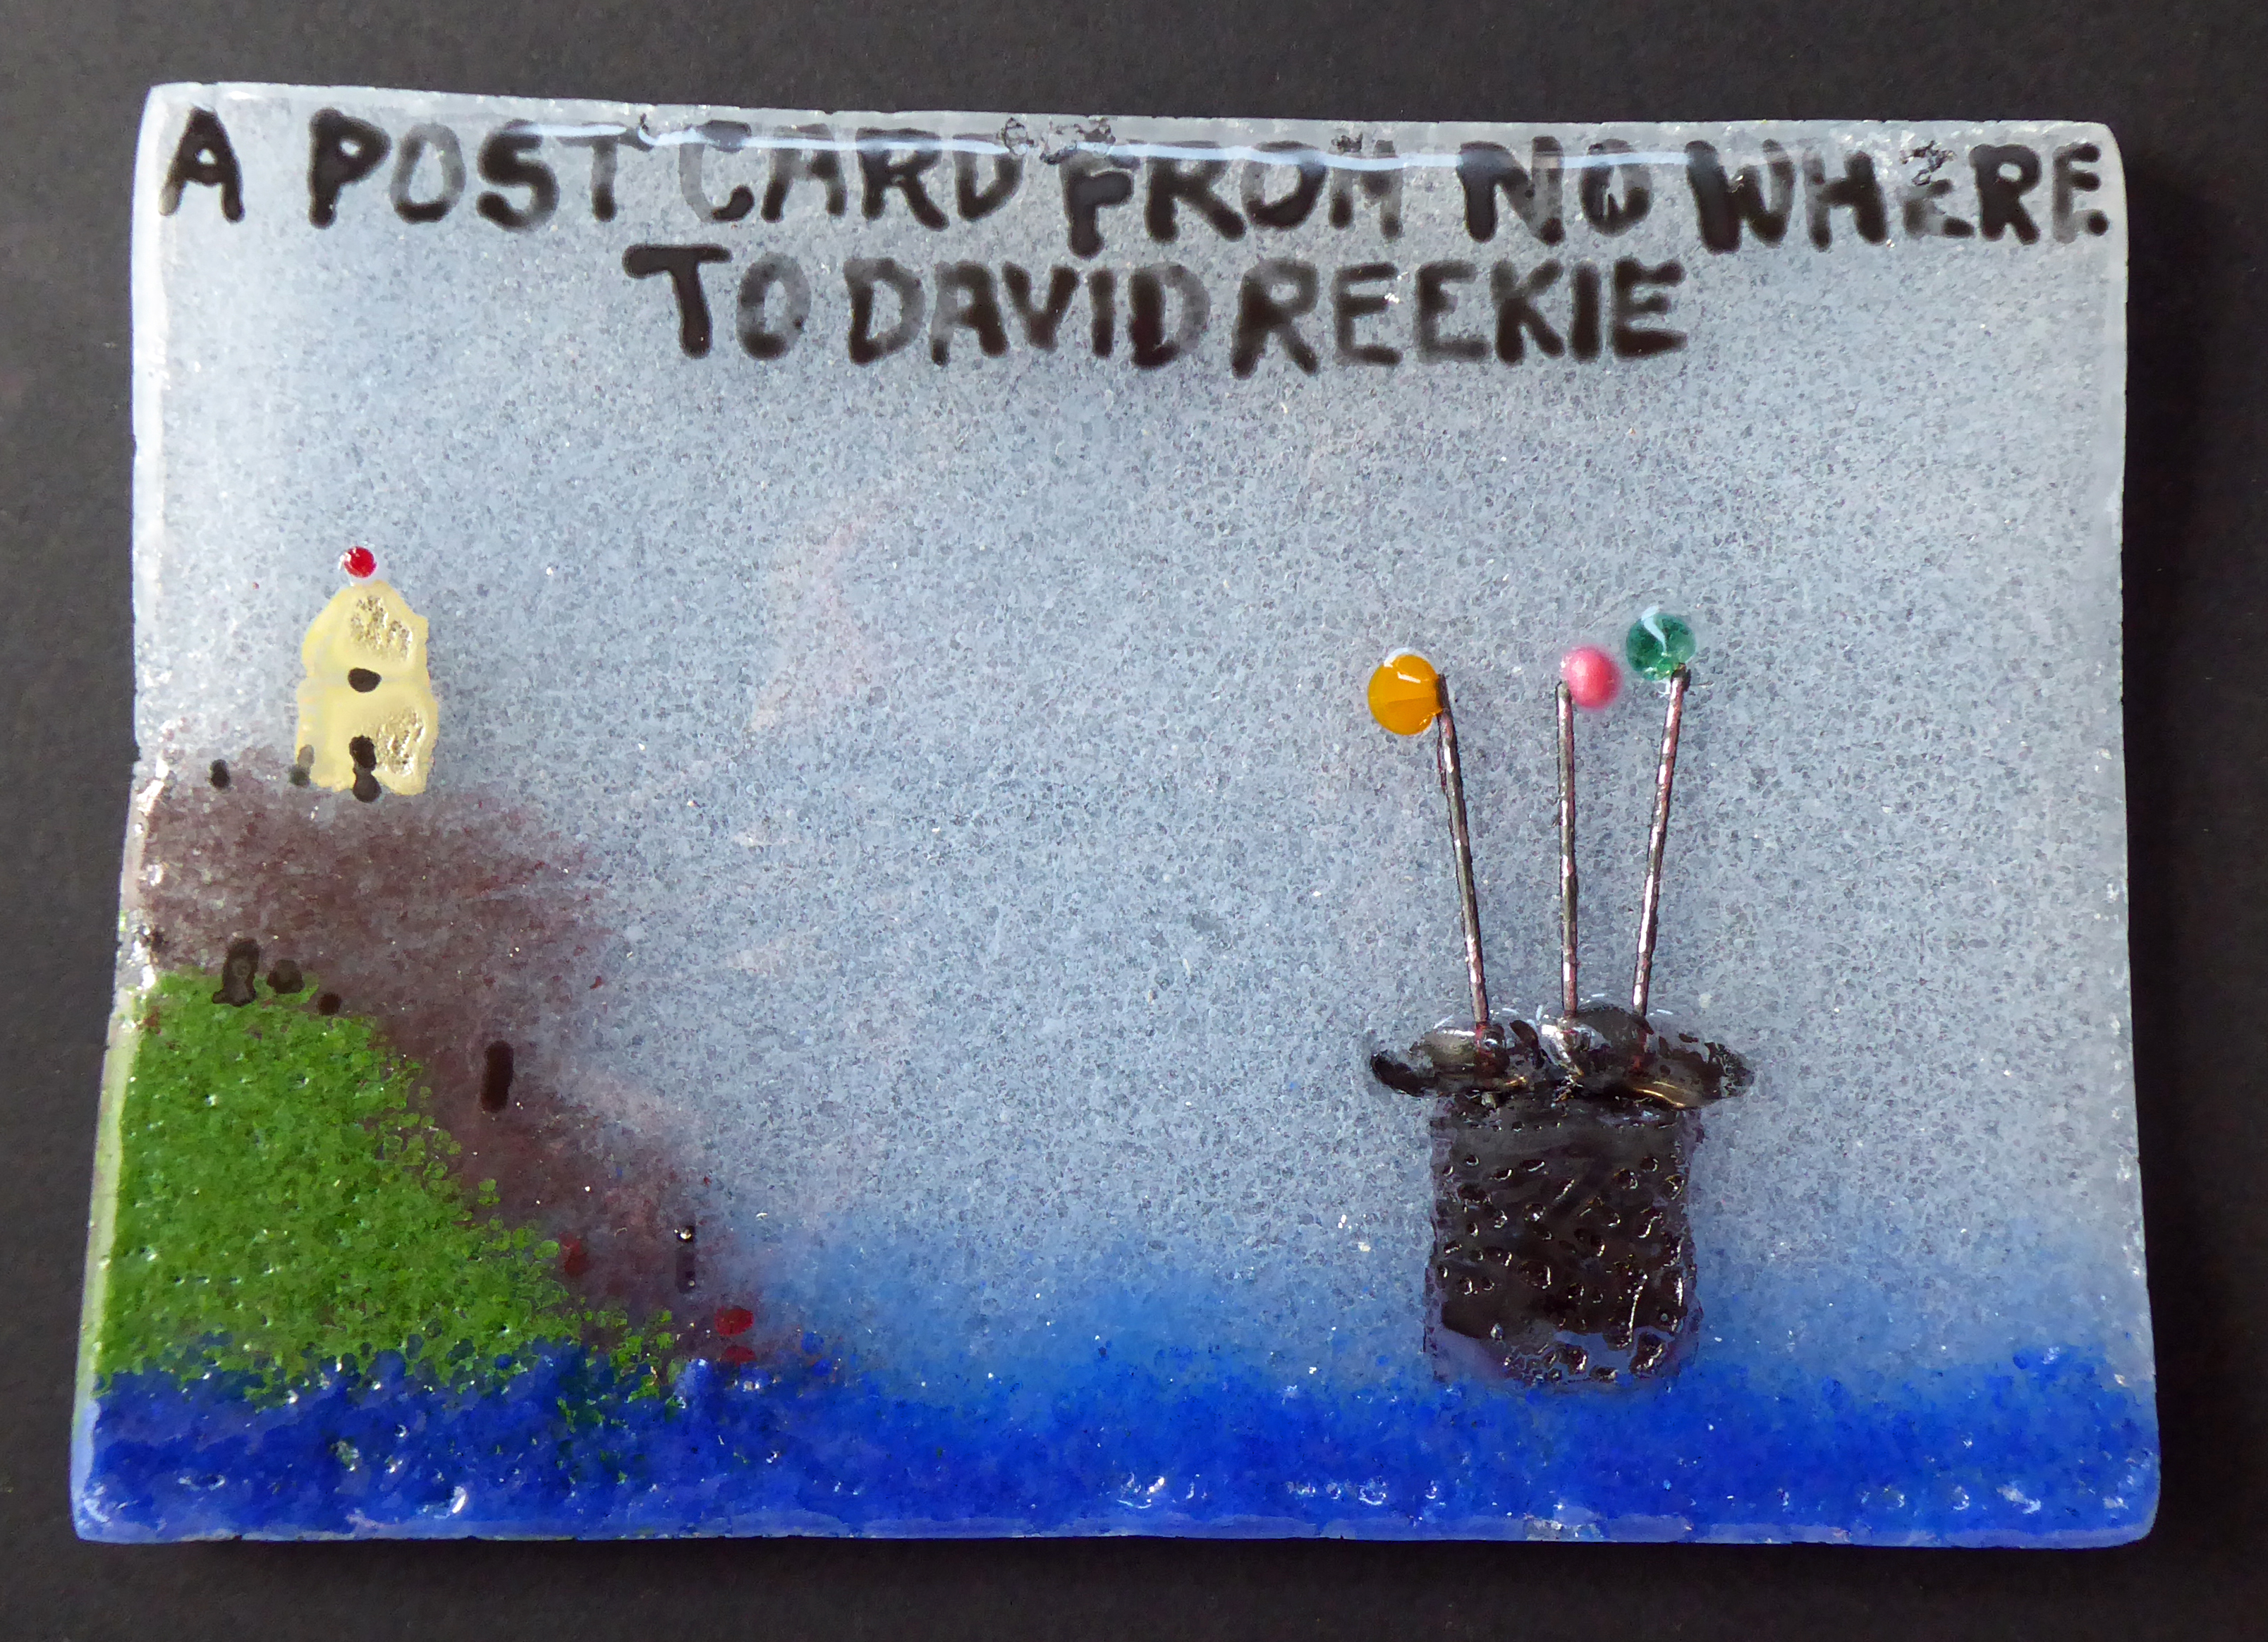 A Postcard From Nowhere to David Reekie